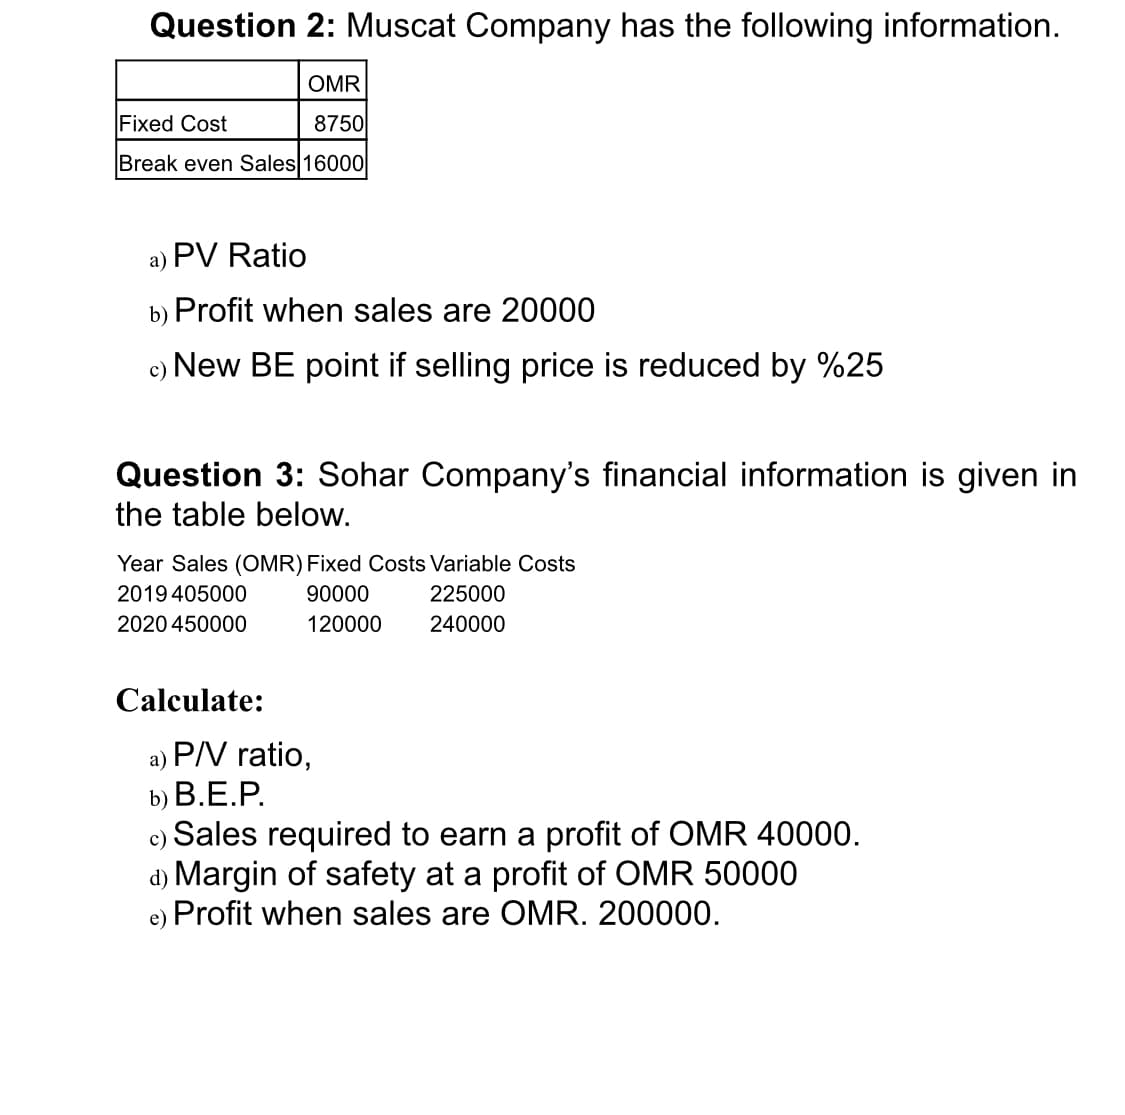 Question 2: Muscat Company has the following information.
OMR
Fixed Cost
8750
Break even Sales 16000
a) PV Ratio
b) Profit when sales are 20000
c) New BE point if selling price is reduced by %25
Question 3: Sohar Company's financial information is given in
the table below.
Year Sales (OMR) Fixed Costs Variable Costs
2019 405000
90000
225000
2020 450000
120000
240000
Calculate:
a) P/V ratio,
b) В.Е.Р.
c) Sales required to earn a profit of OMR 40000.
d) Margin of safety at a profit of OMR 50000
e) Profit when sales are OMR. 200000.
